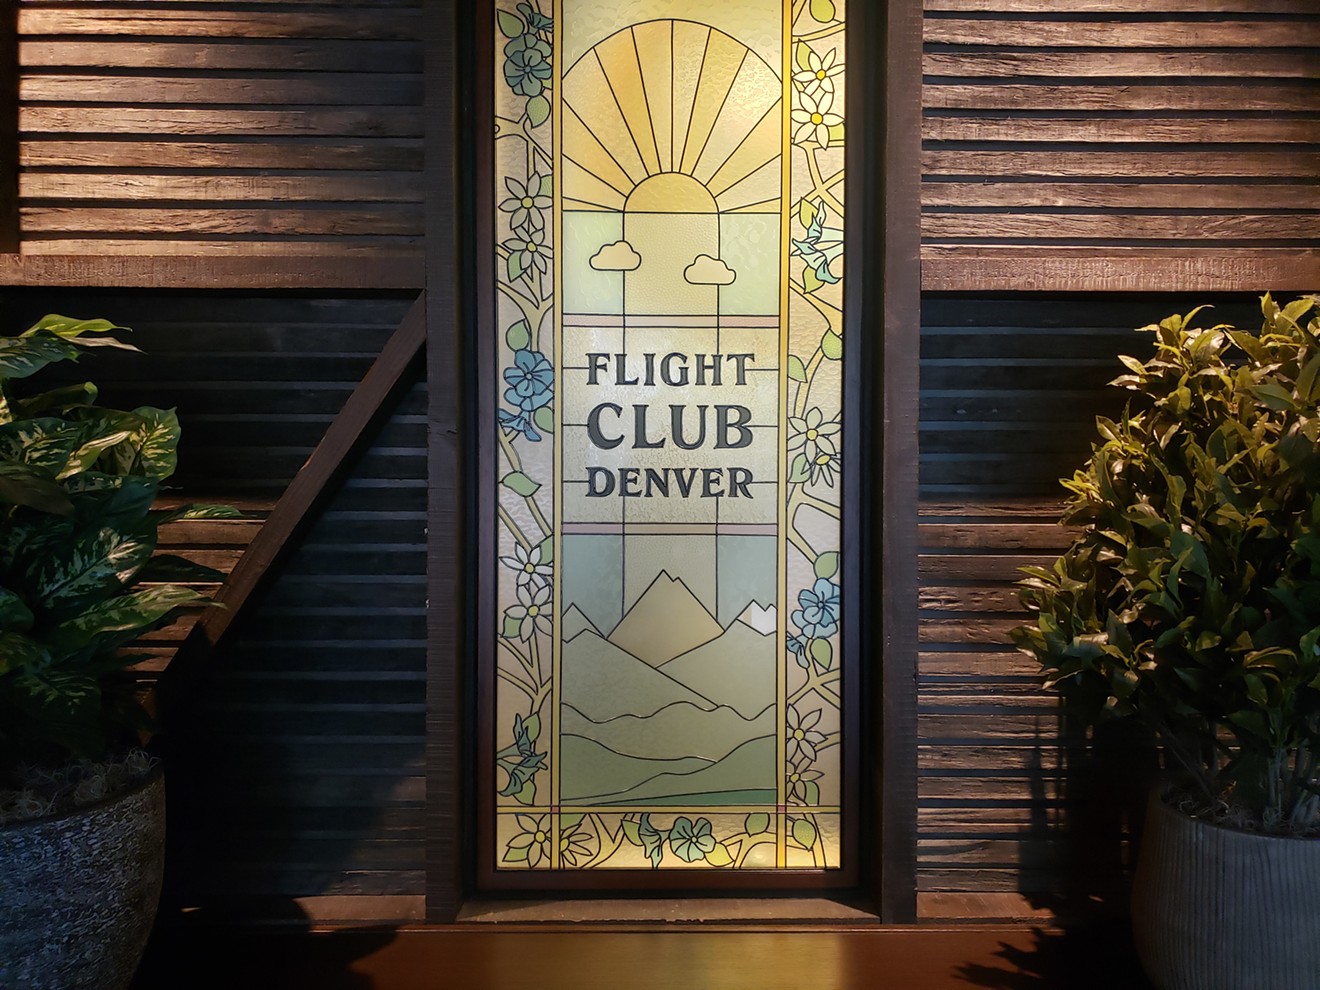 Flight Club is a London-based concept that has five other locations in the U.S.